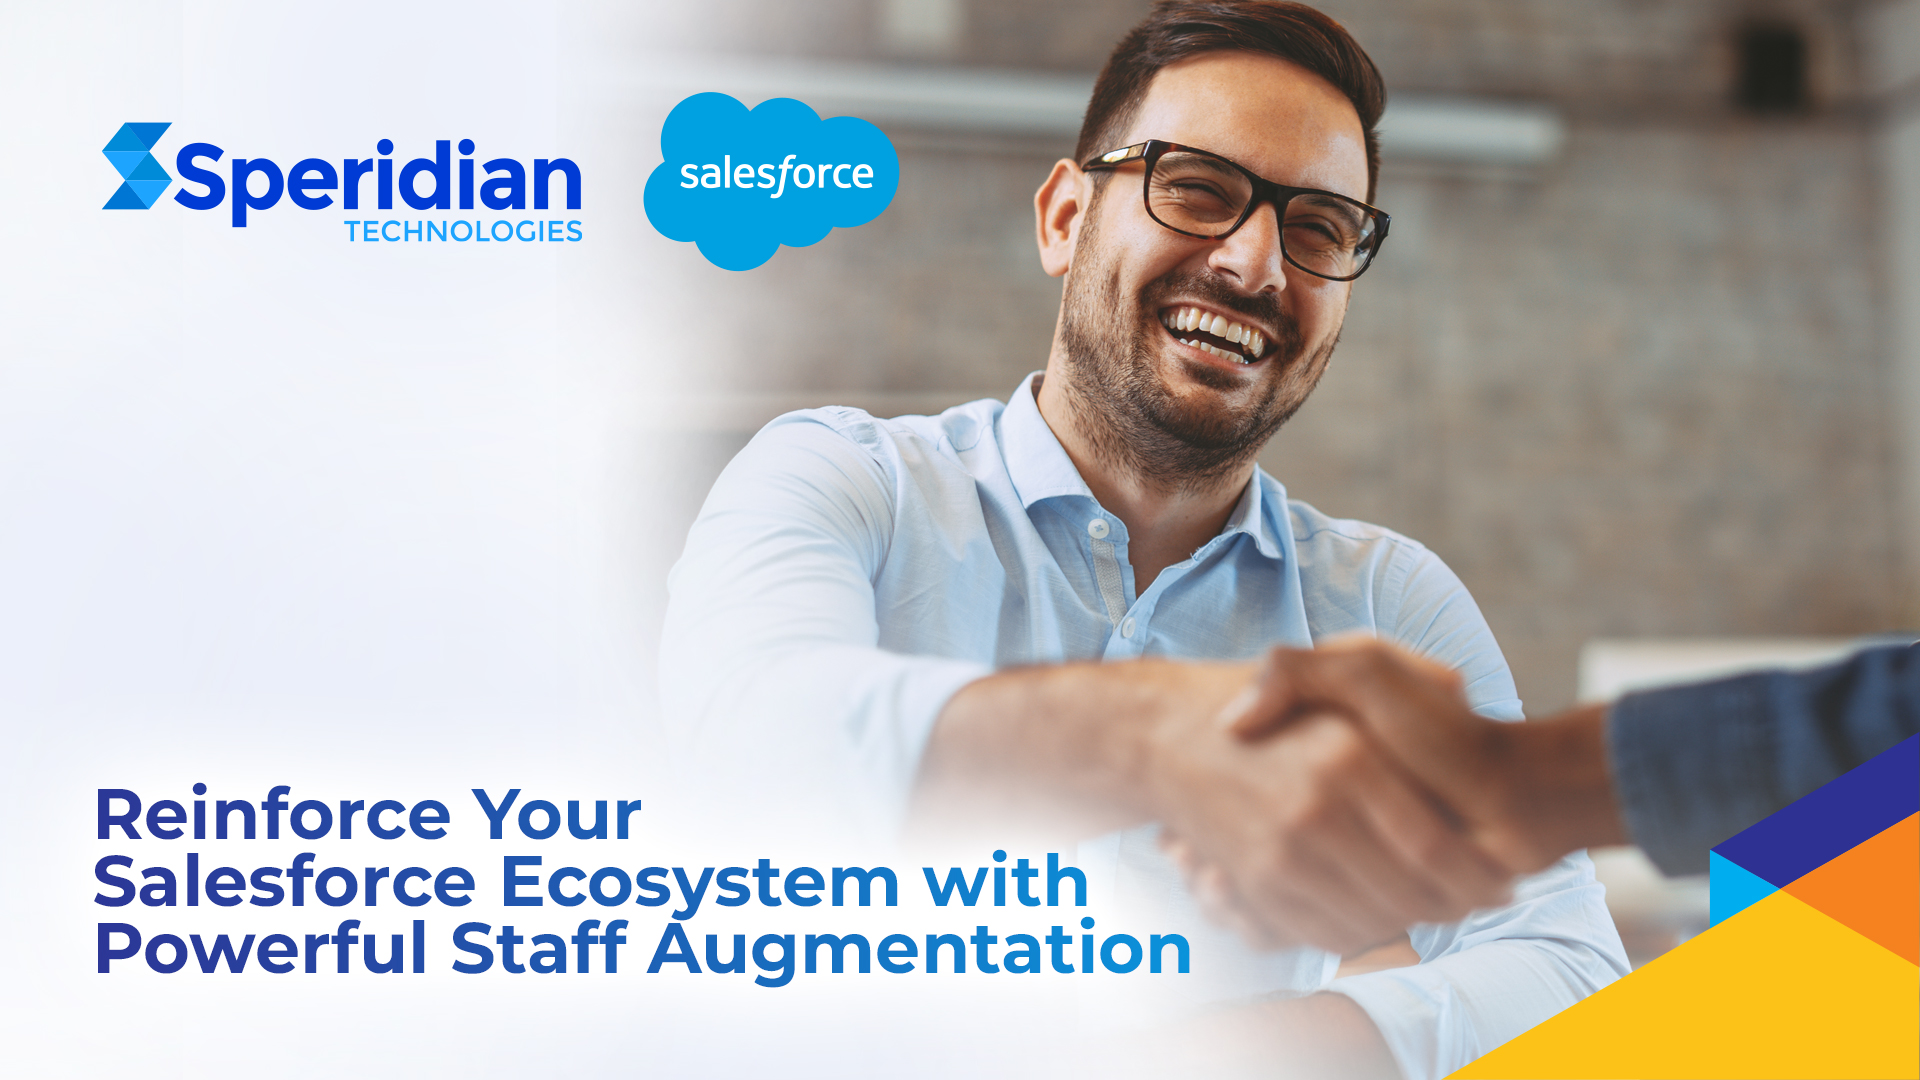 Reinforce Your Salesforce Ecosystem with Powerful Staff Augmentation